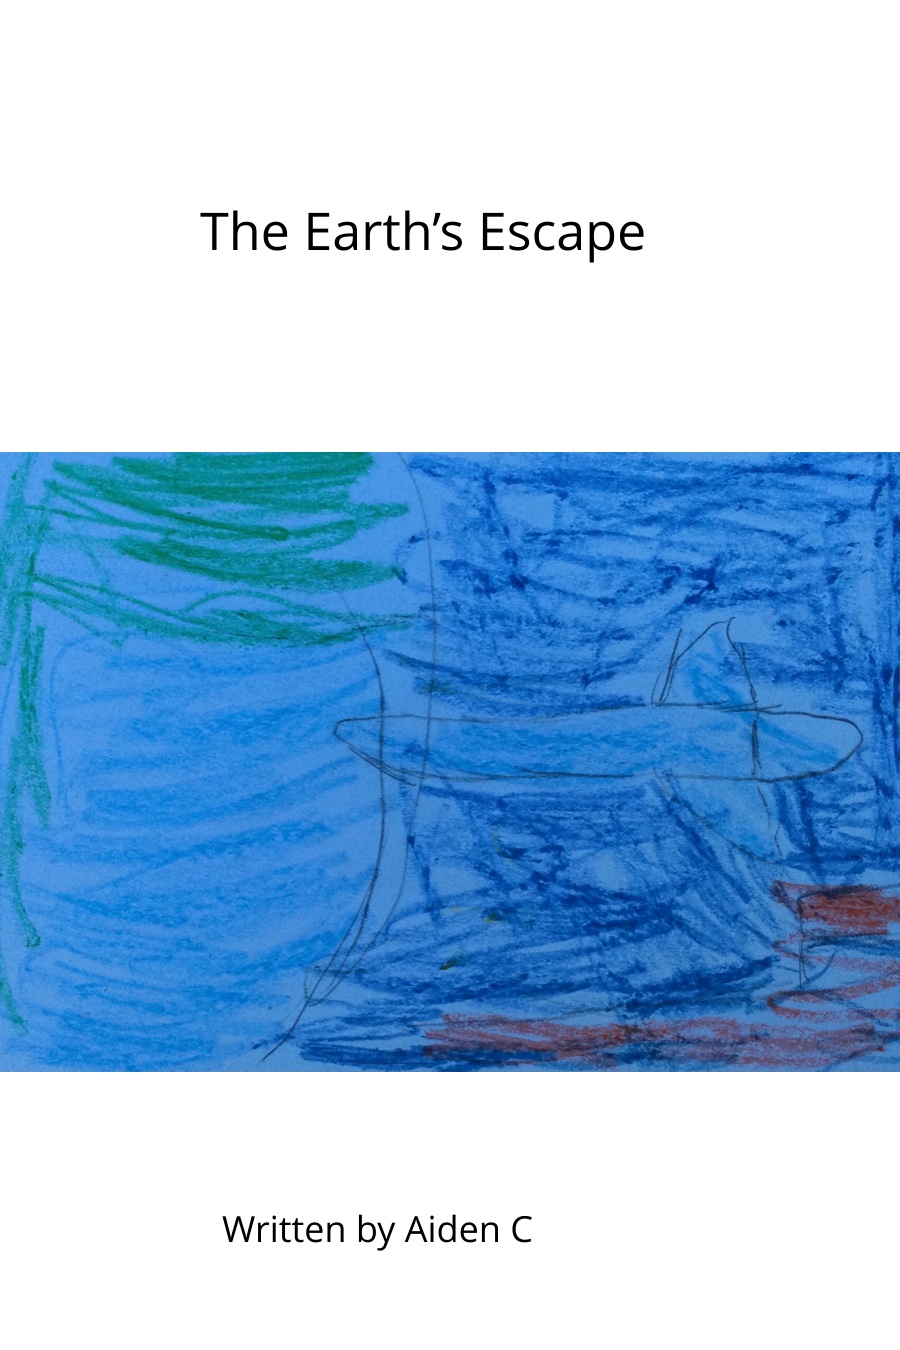 The Earths Escape by Aiden C